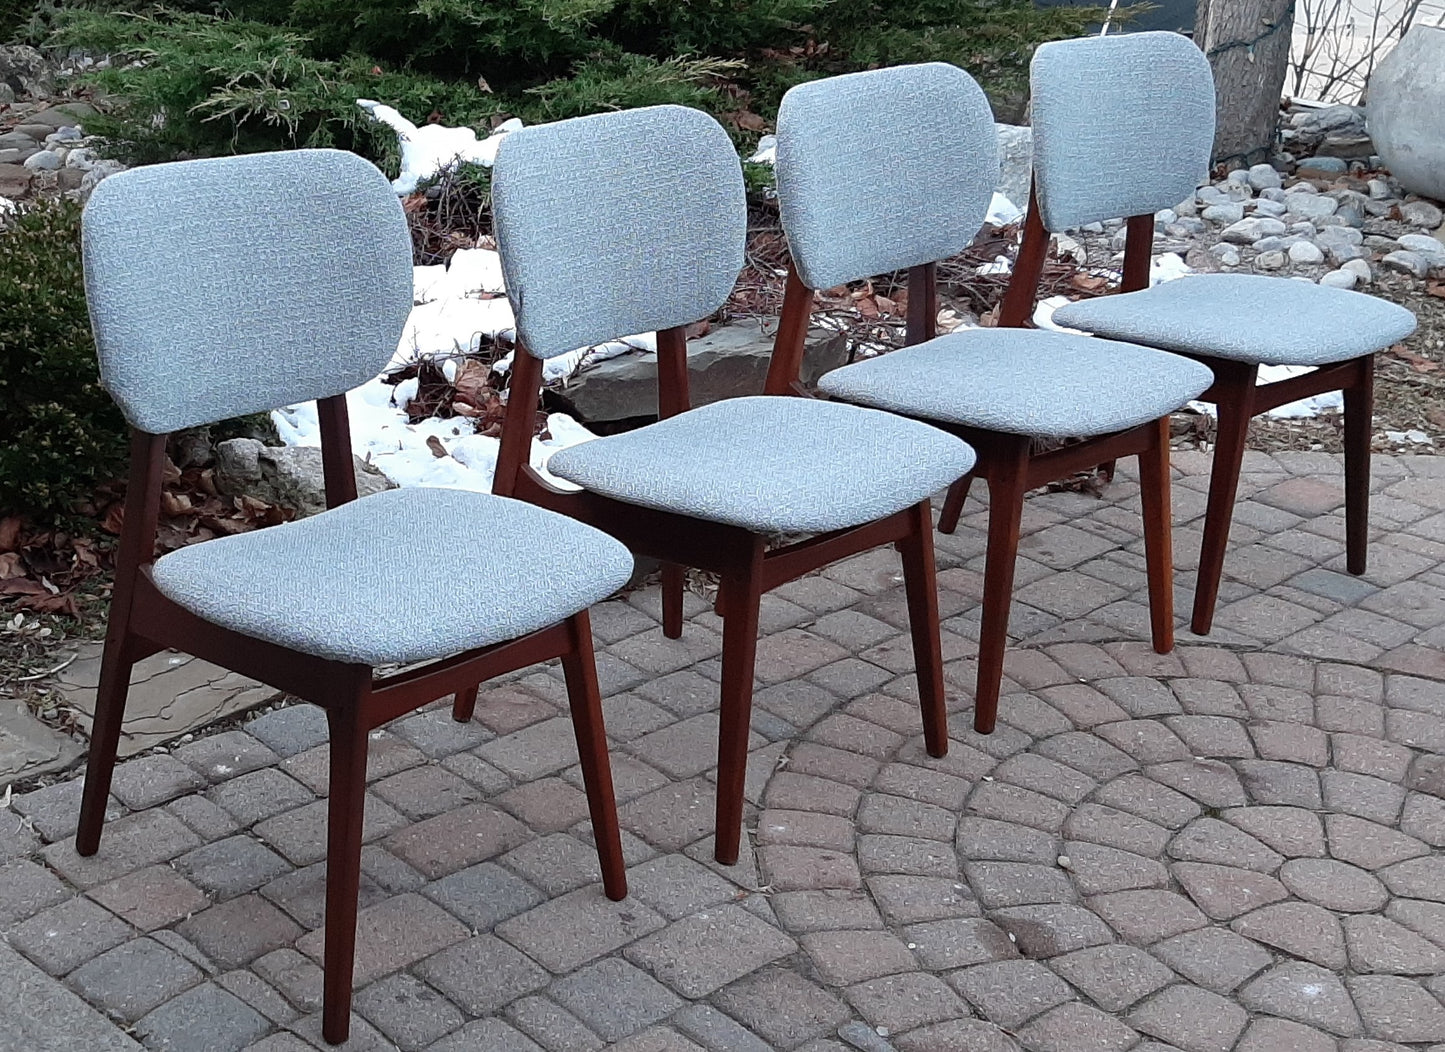 4 REFINISHED REUPHOLSTERED Danish MCM Teak Dining Chairs, A. Olsen style,  like new